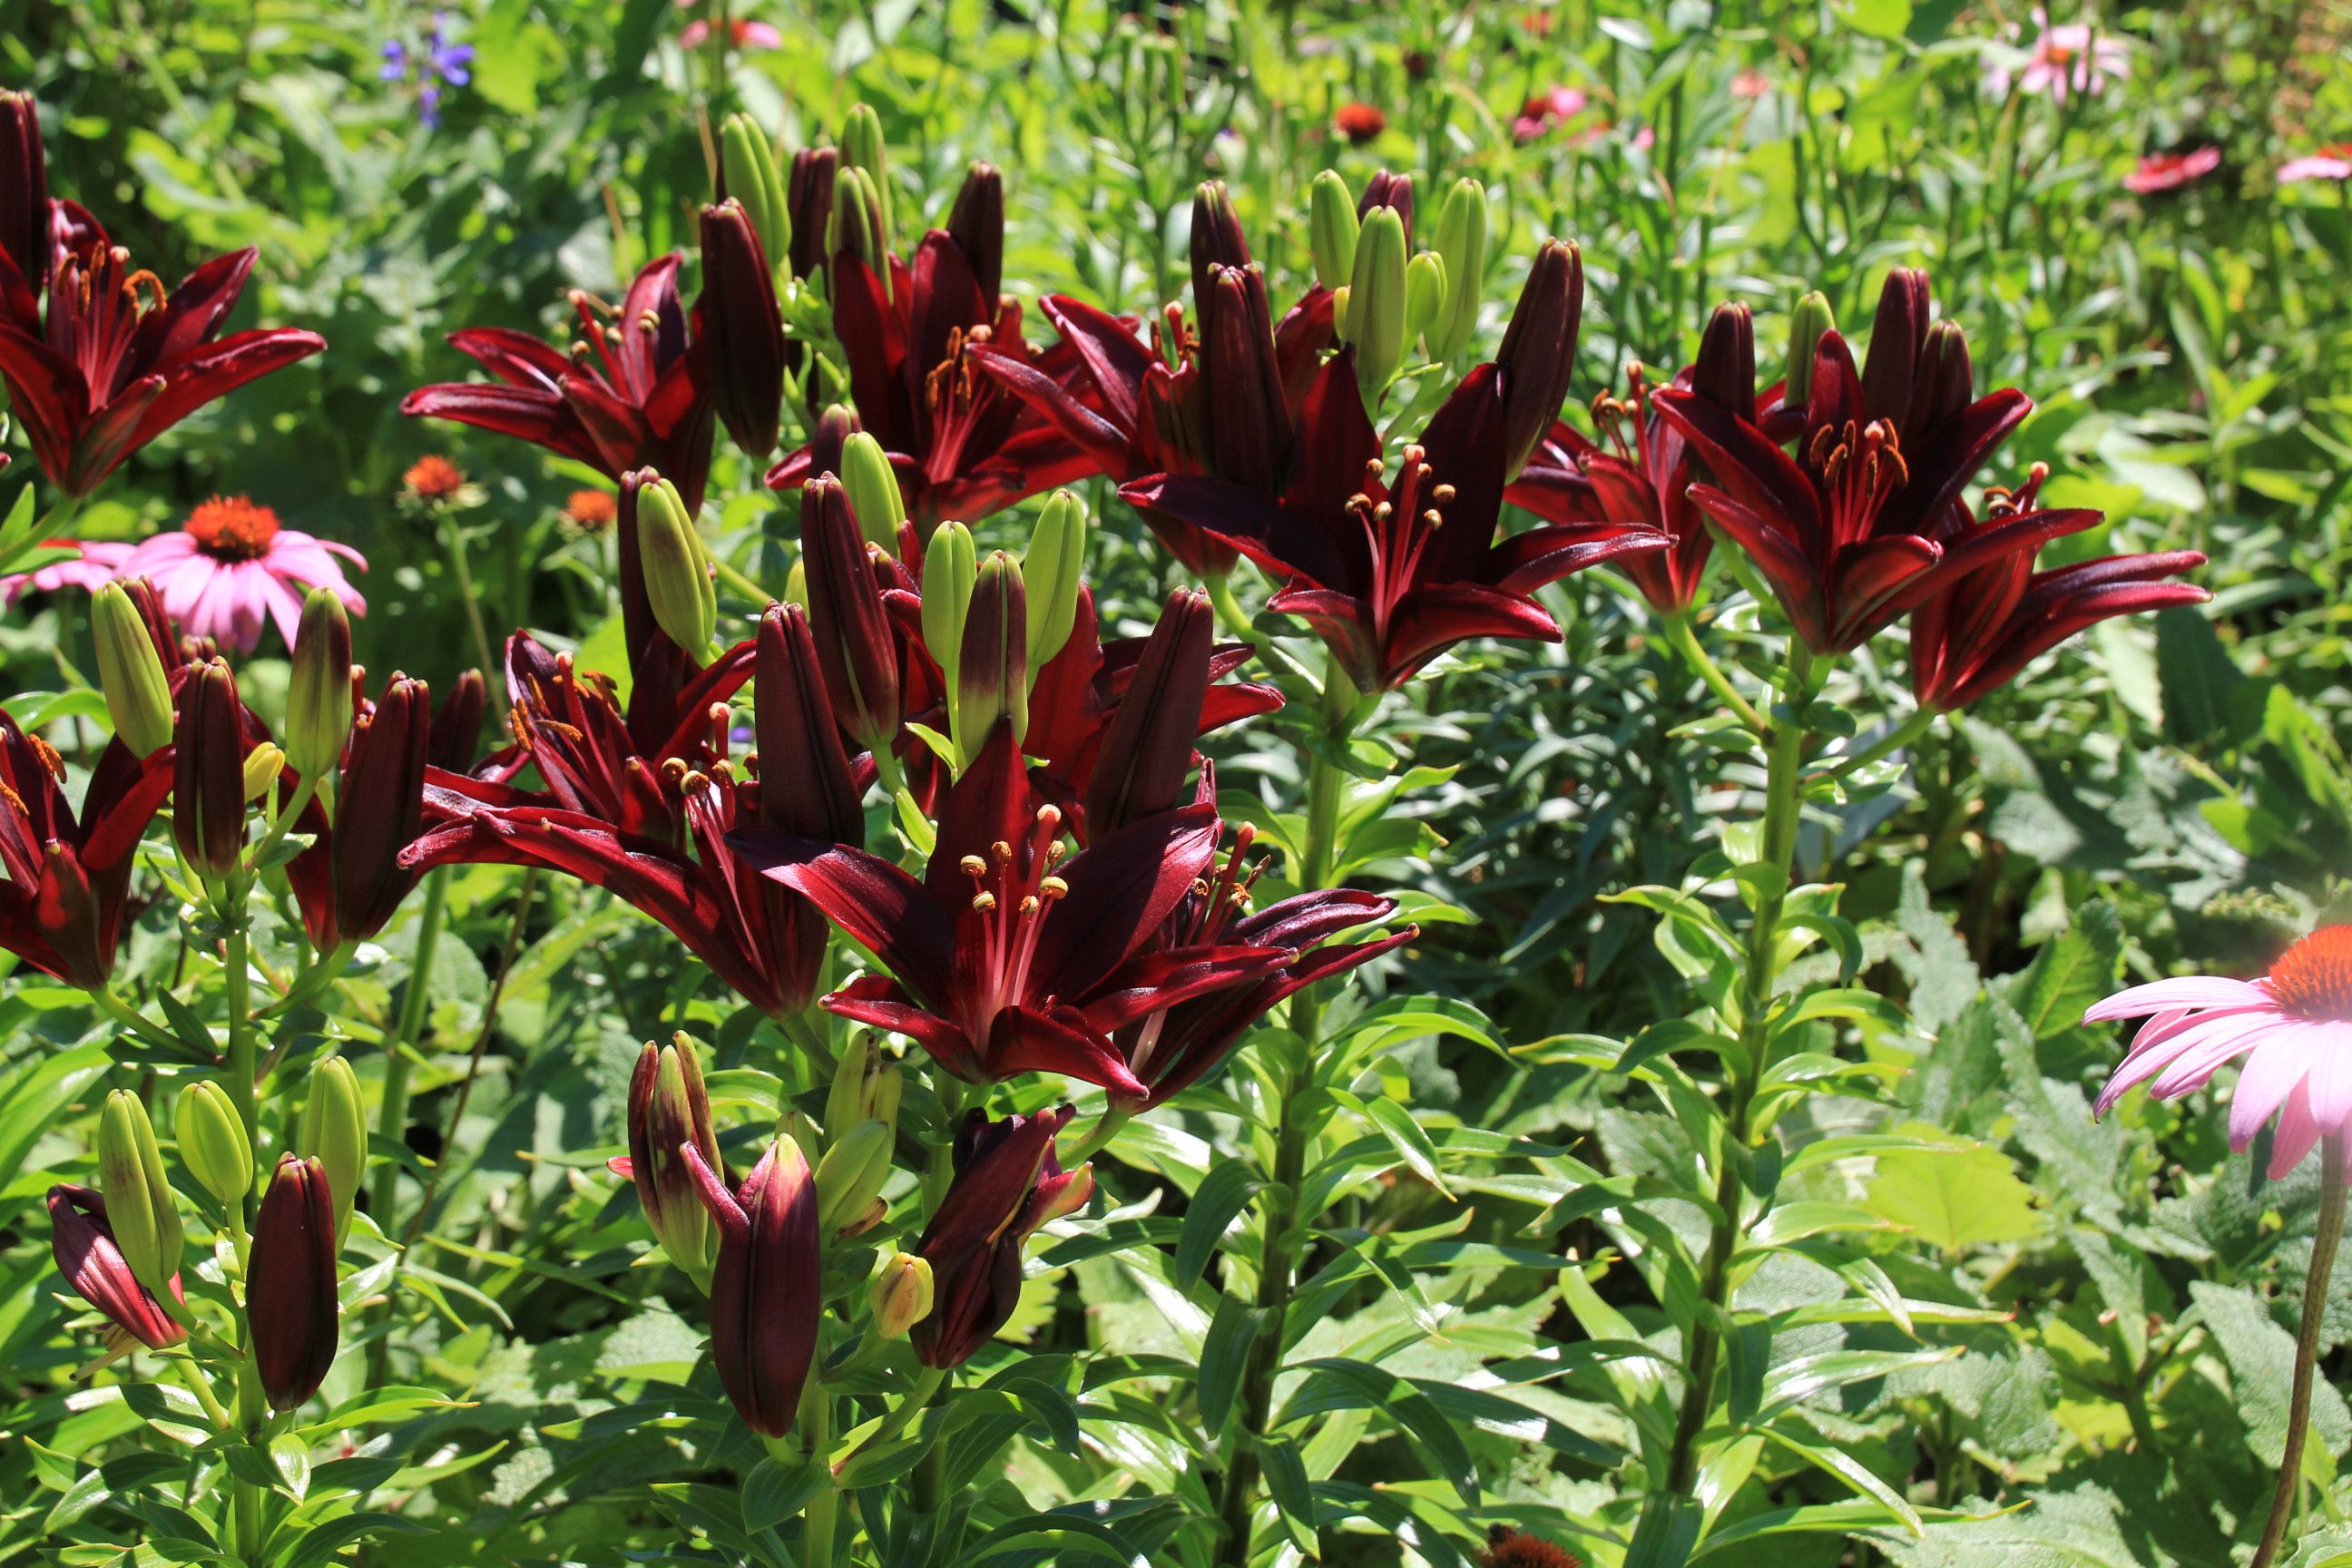 lily plants in a sunny garden with deep, dark red flowers